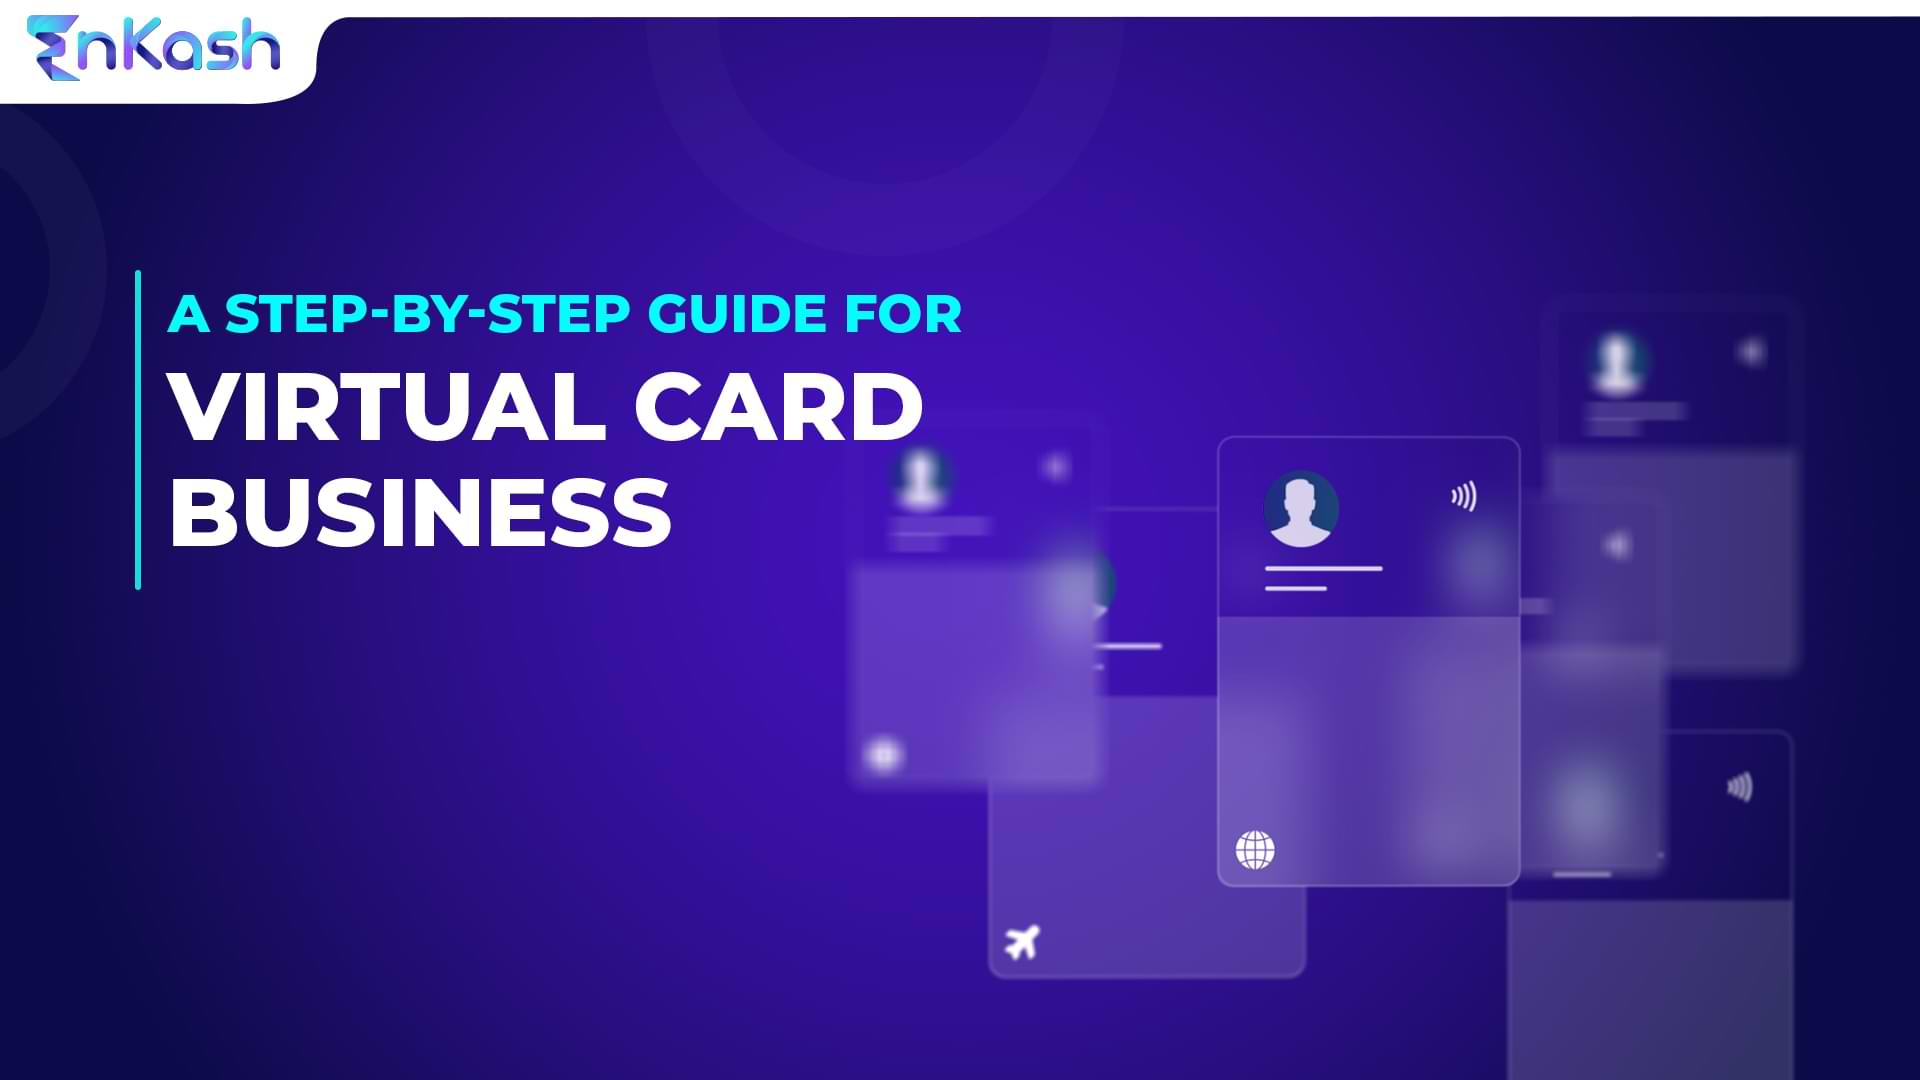 Guide for virtual card business